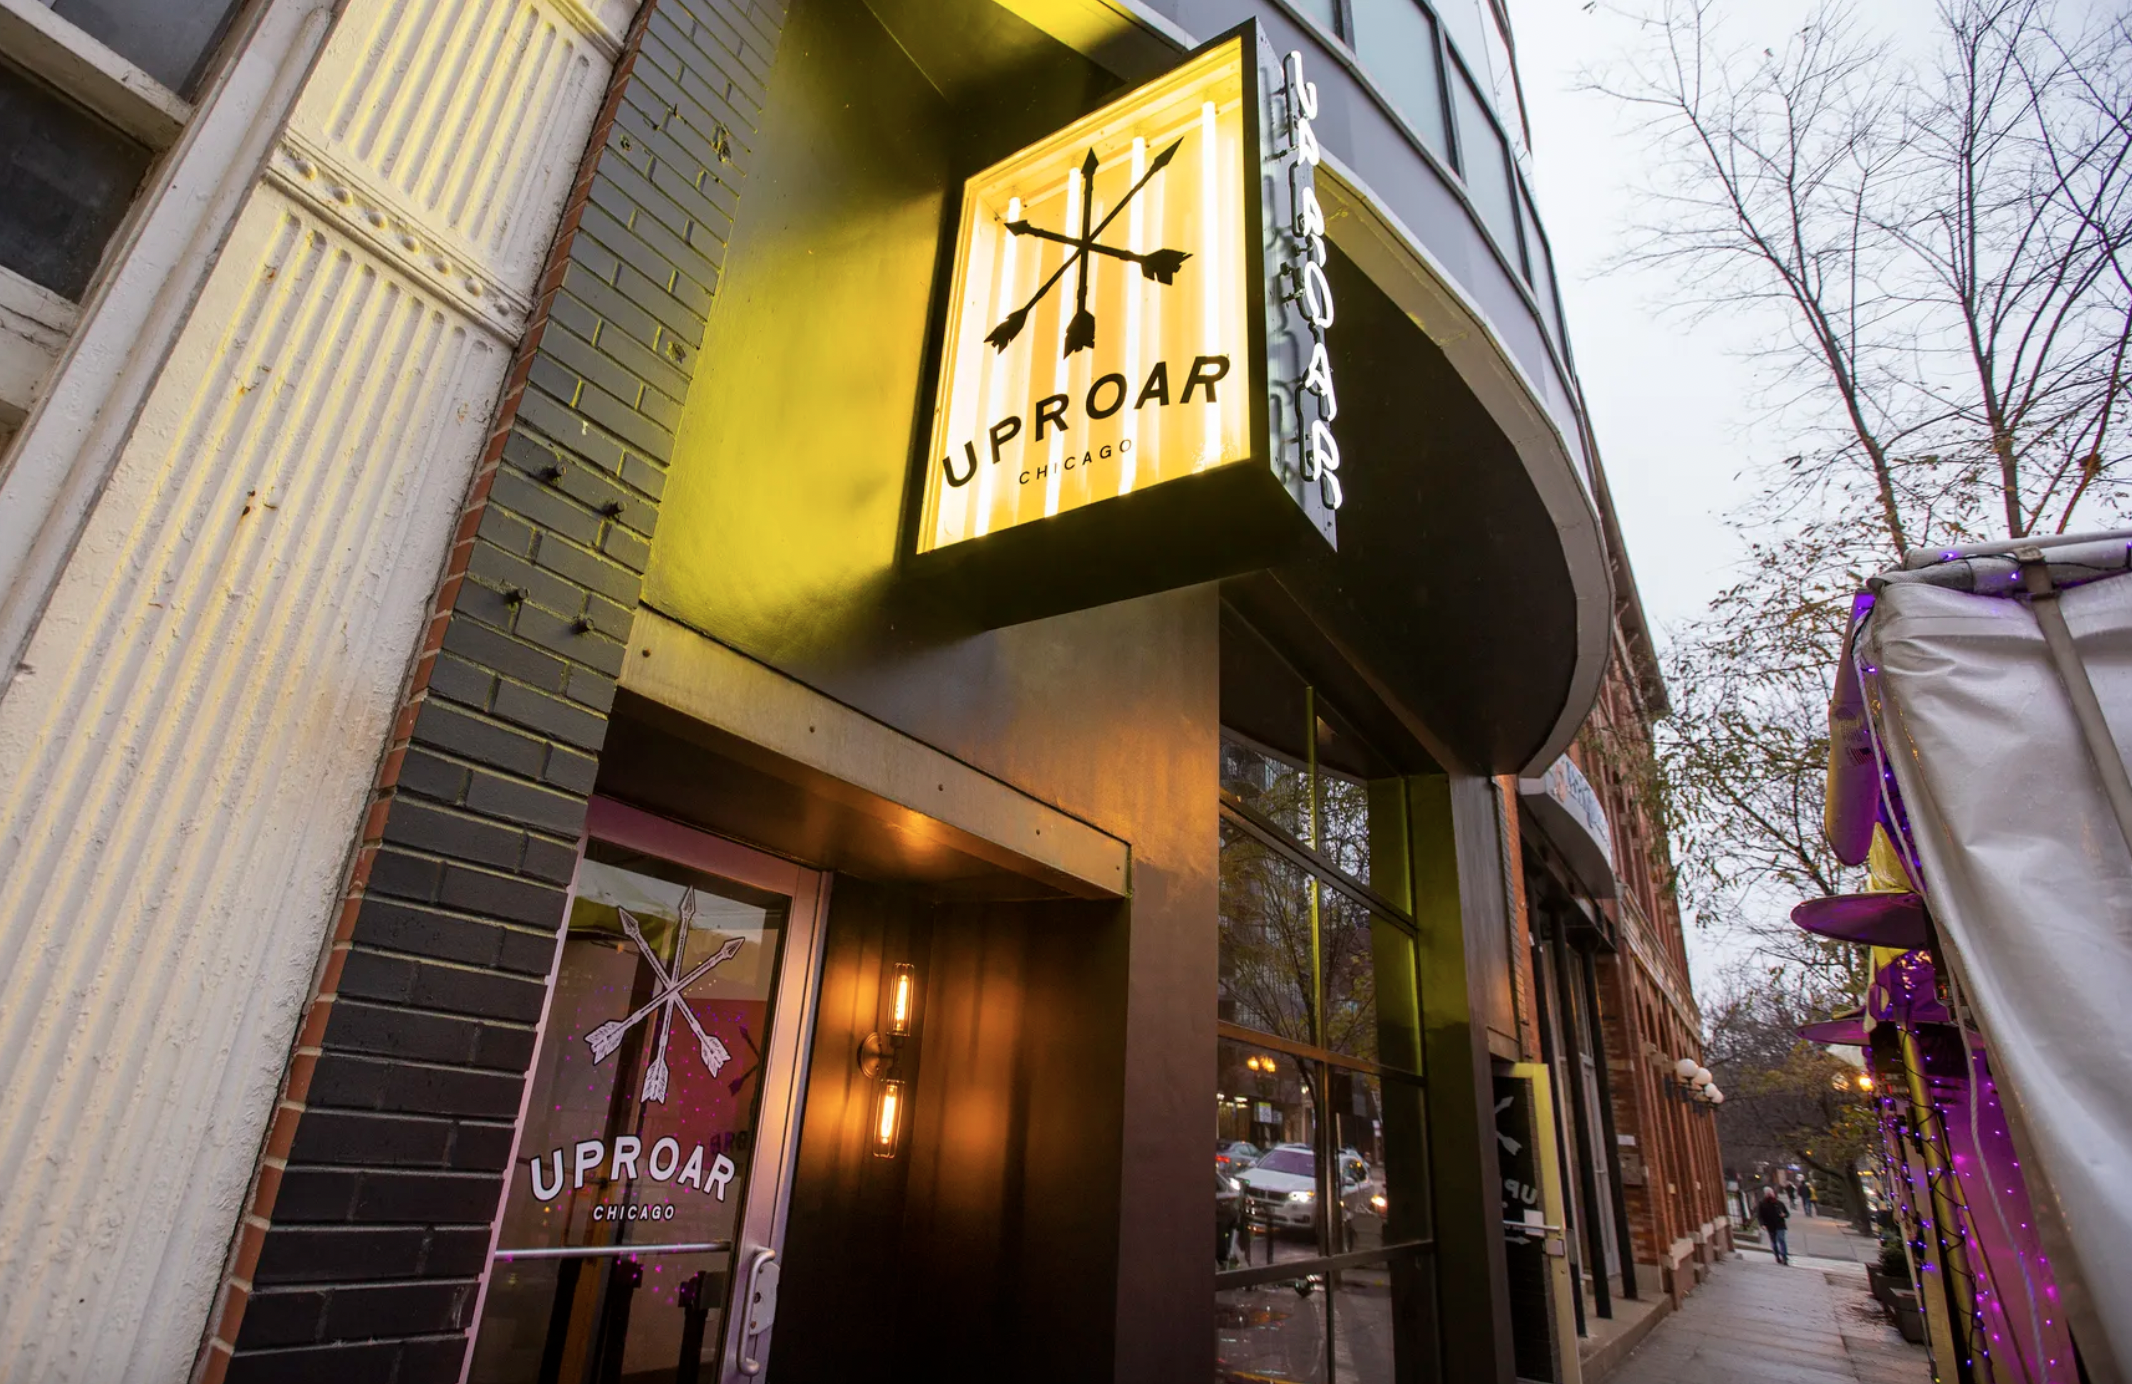 A black-painted brick restaurant exterior with a yellow sign that reads “Uproar.”